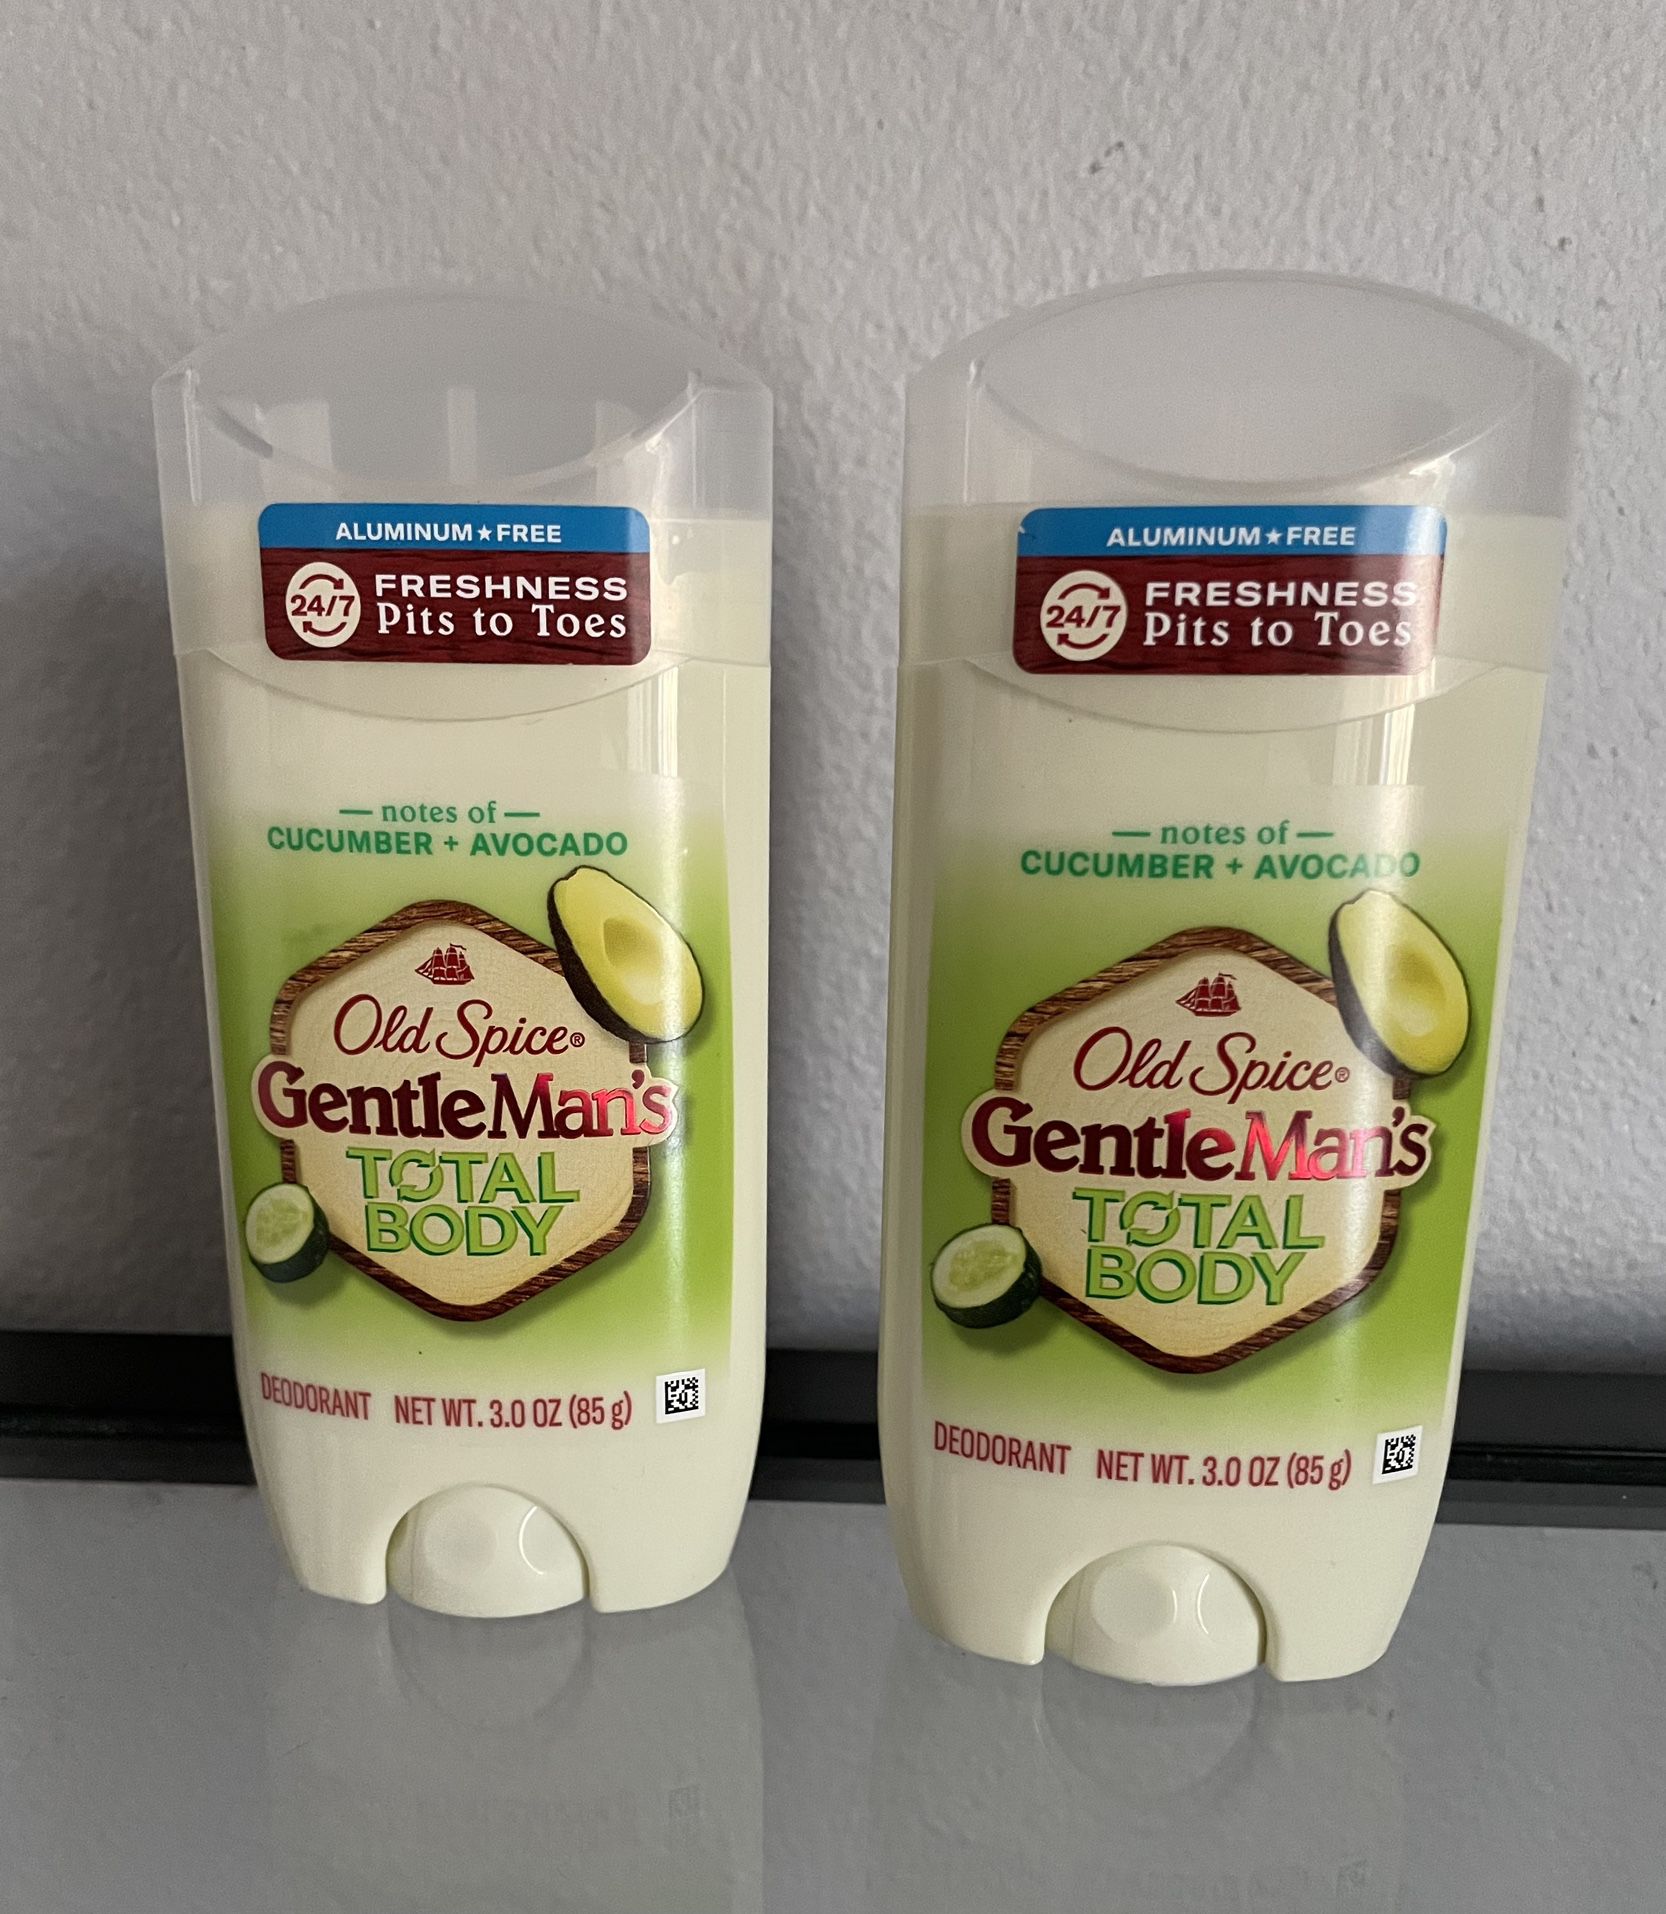 OLD SPICE GENTLE MAN’S TOTAL BODY 